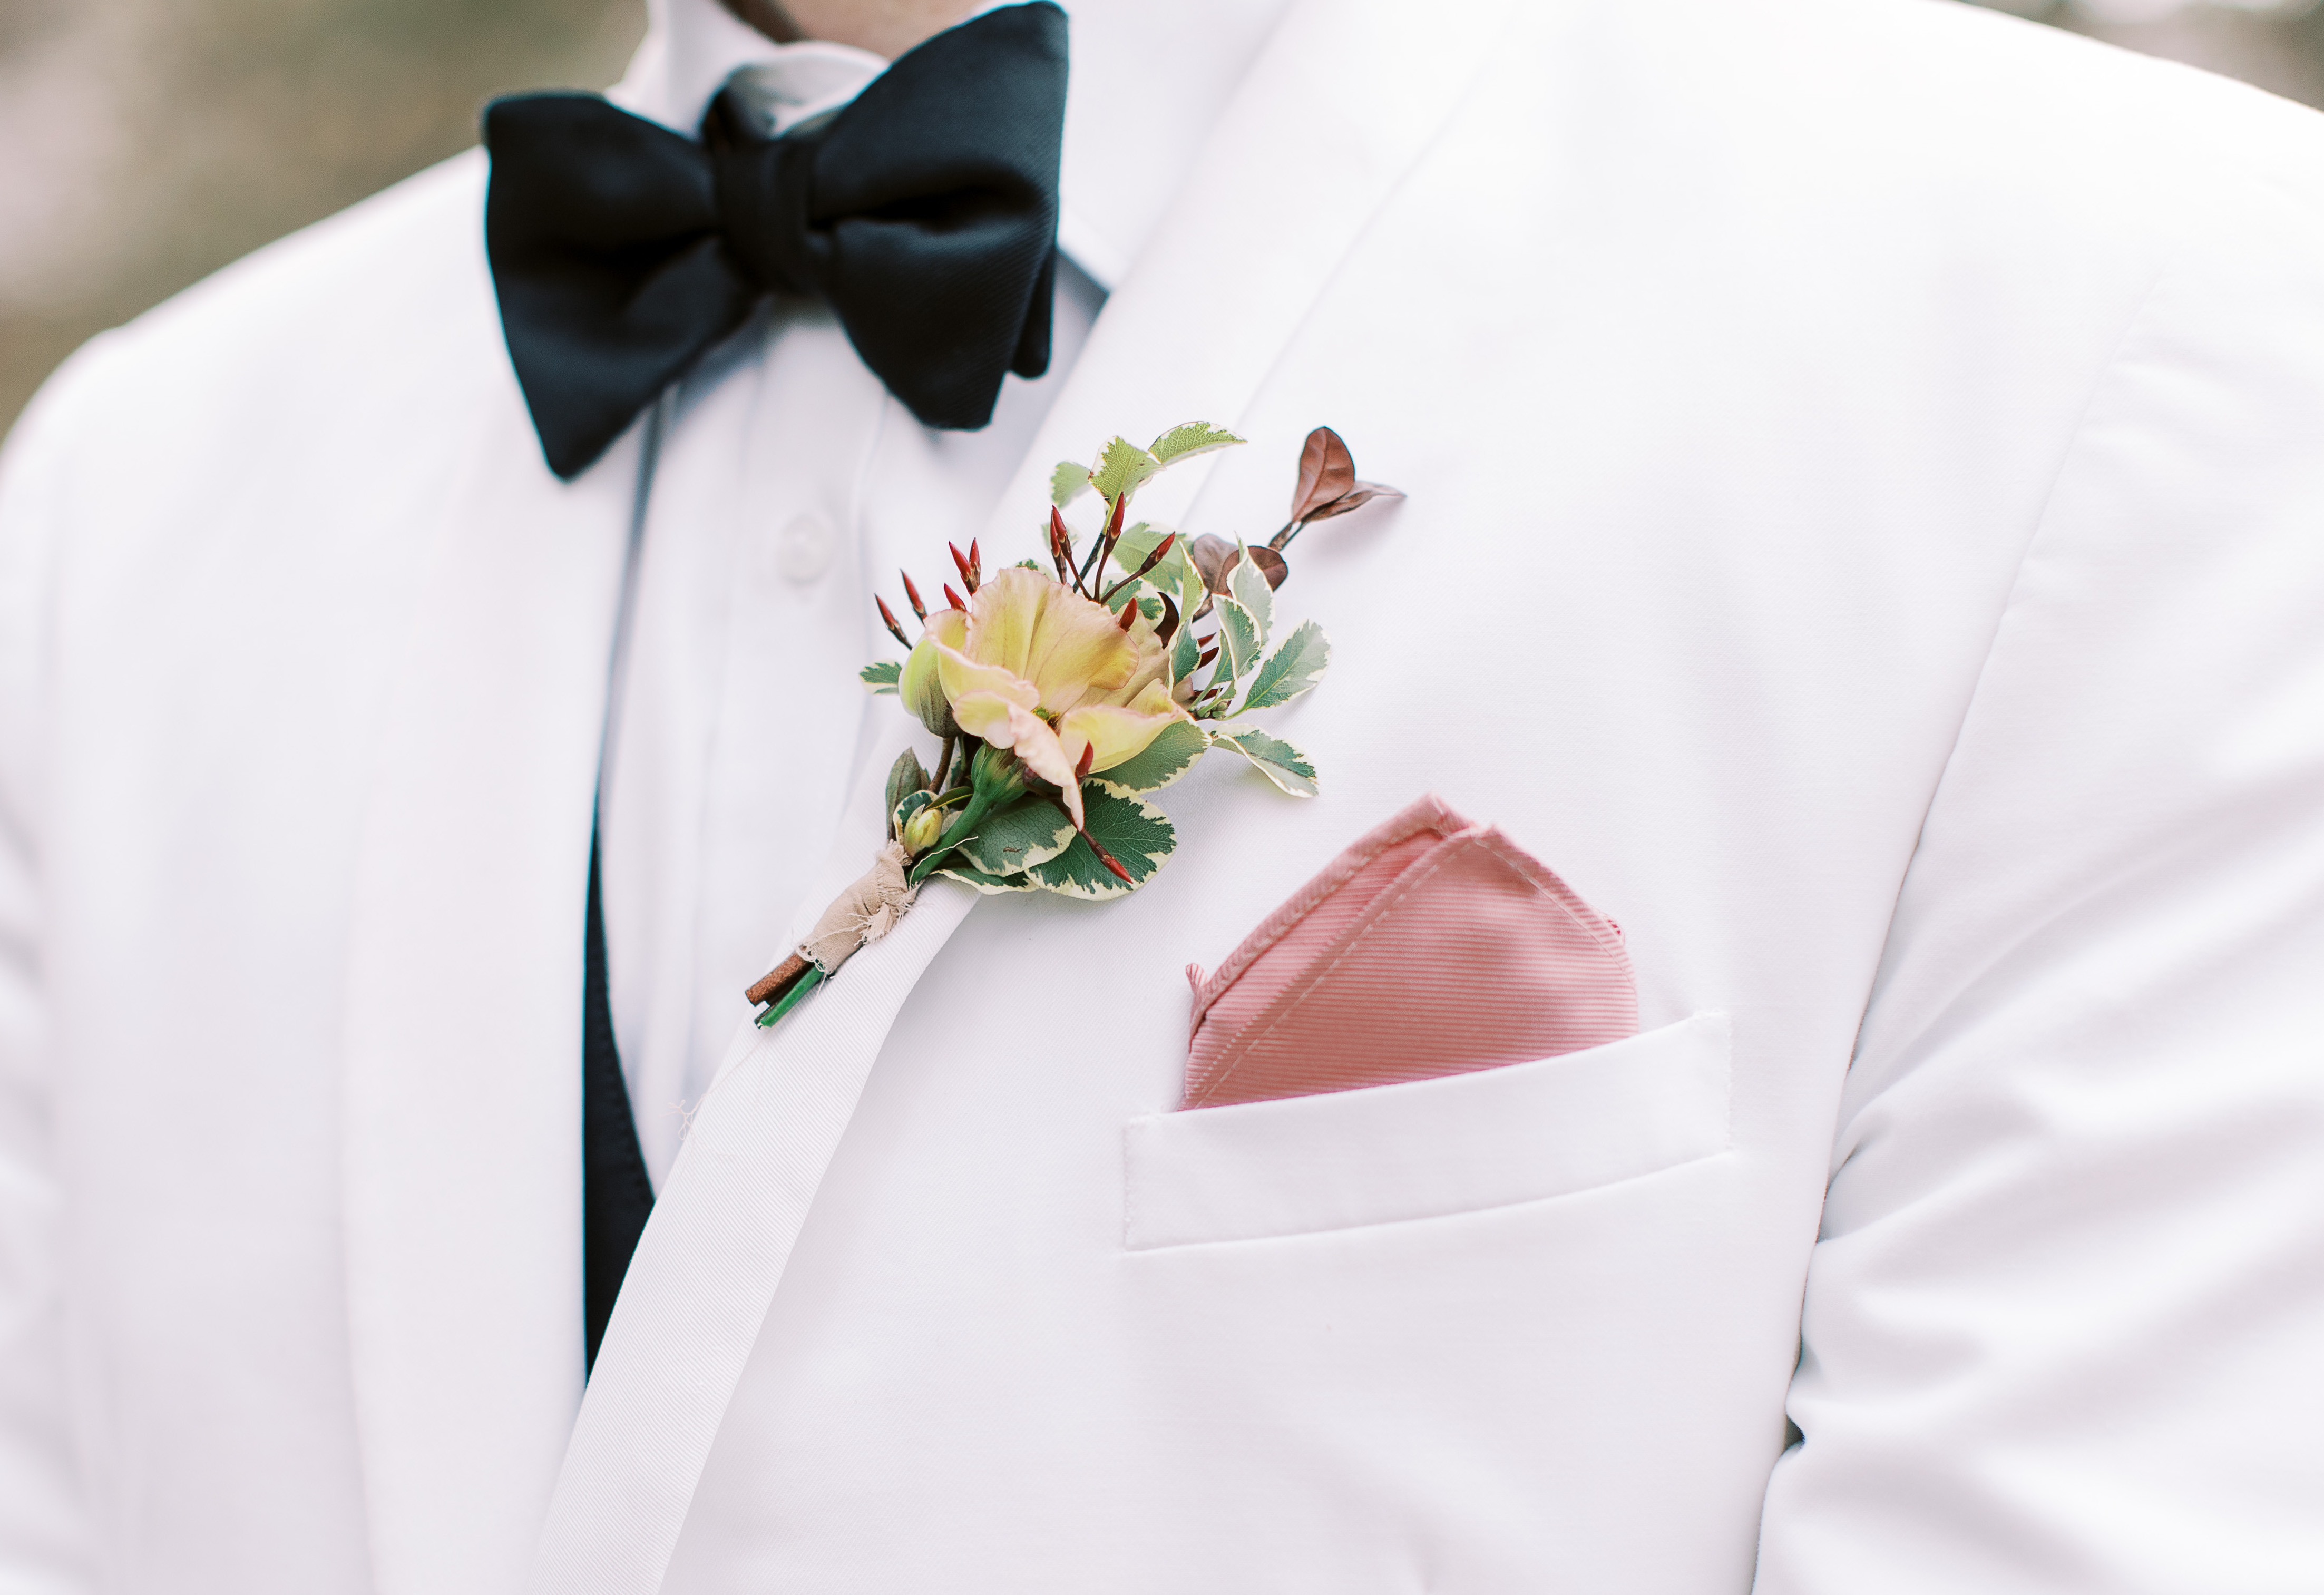 An up close photo of the groom's boutonnière before the al fresco wedding ceremony.